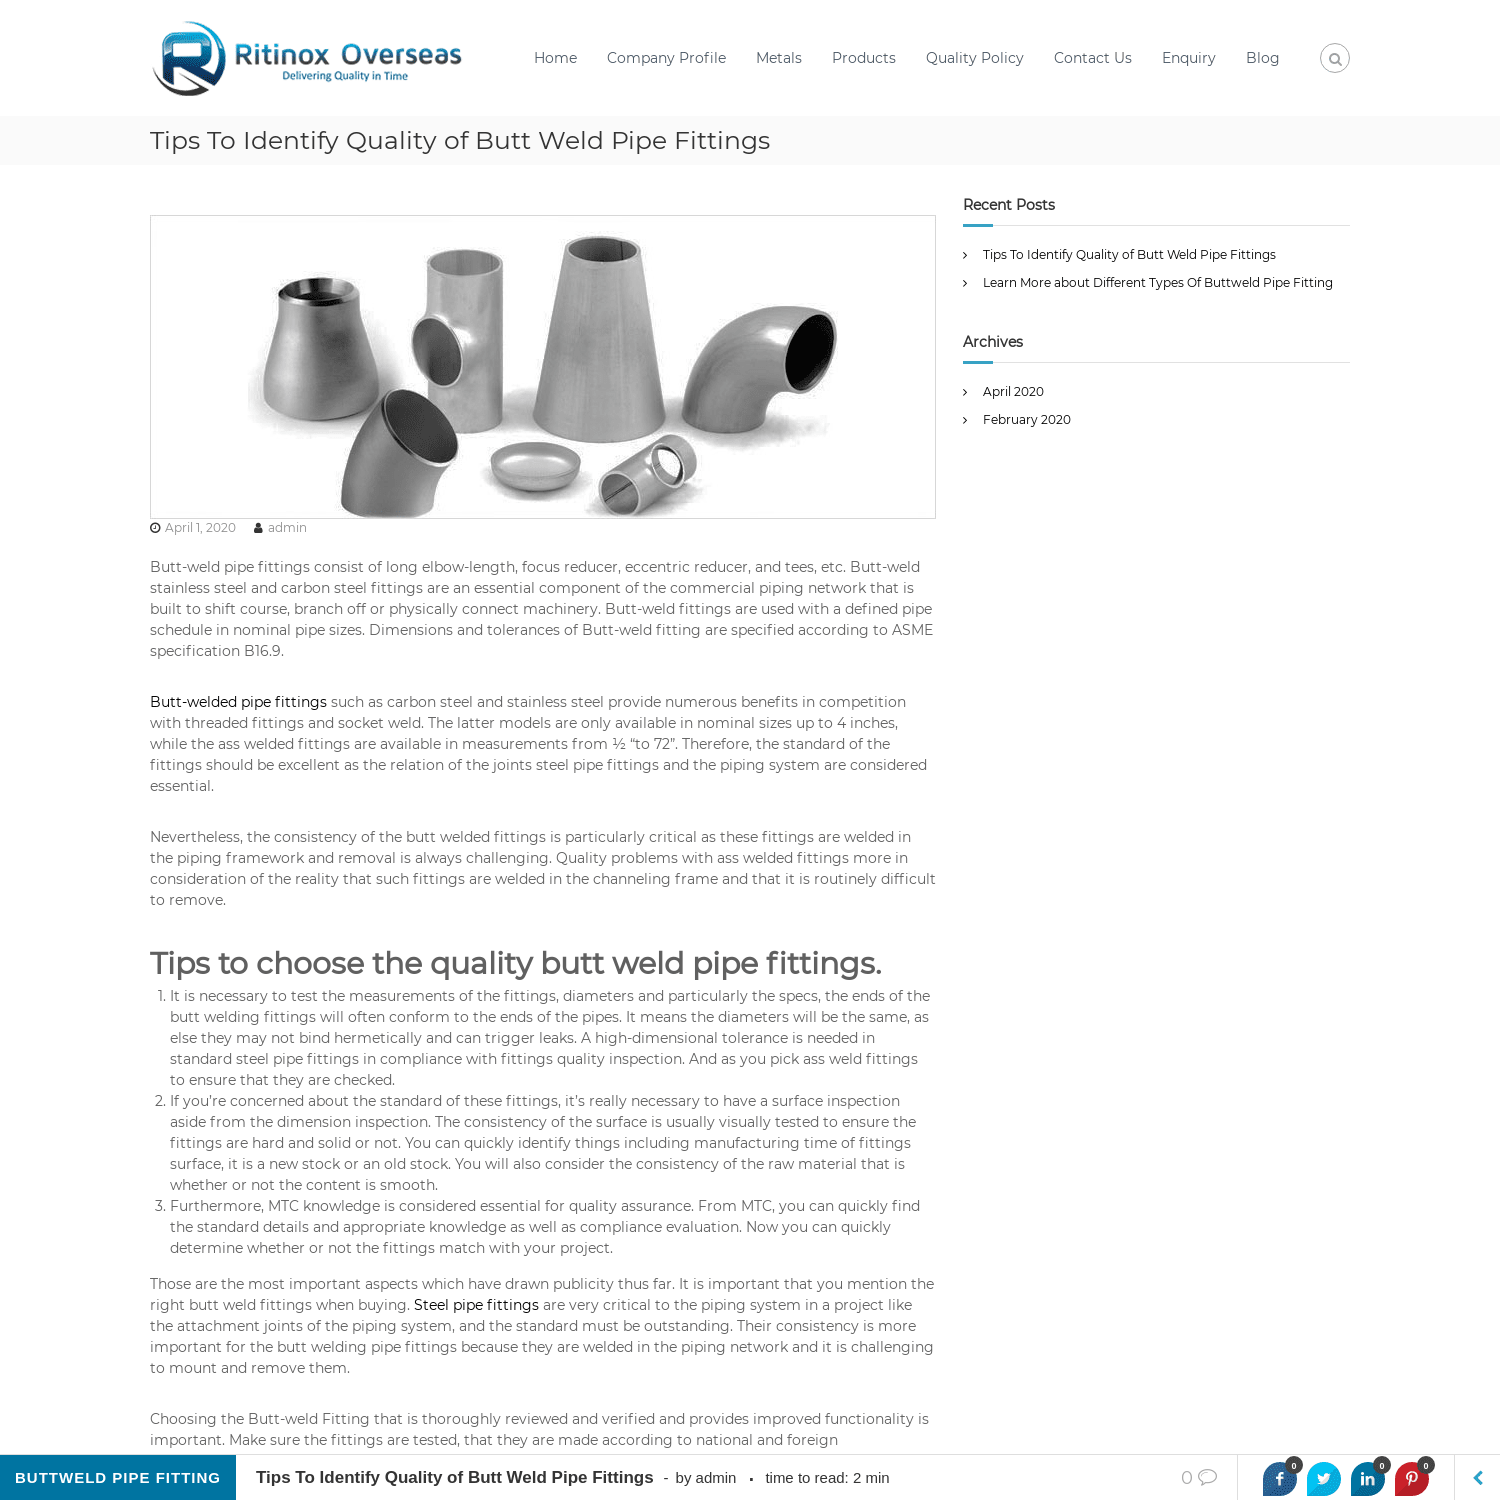 Tips To Identify Quality of Butt Weld Pipe Fittings - Ritinox overseas Blog